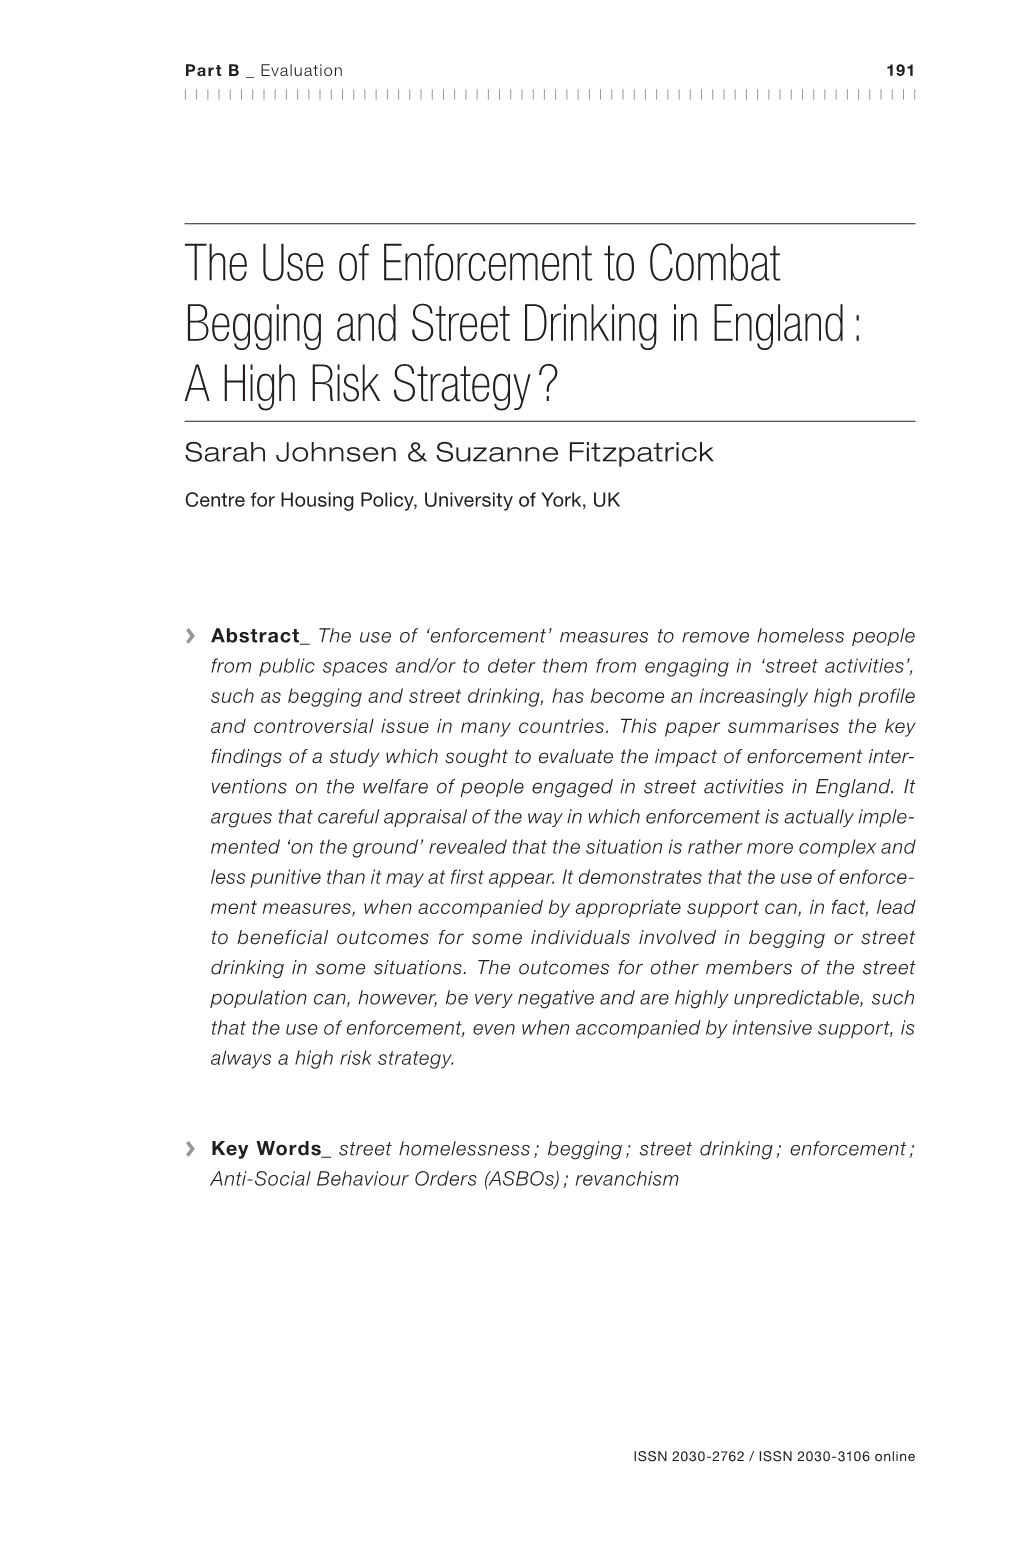 The Use of Enforcement to Combat Begging and Street Drinking in England : a High Risk Strategy ?